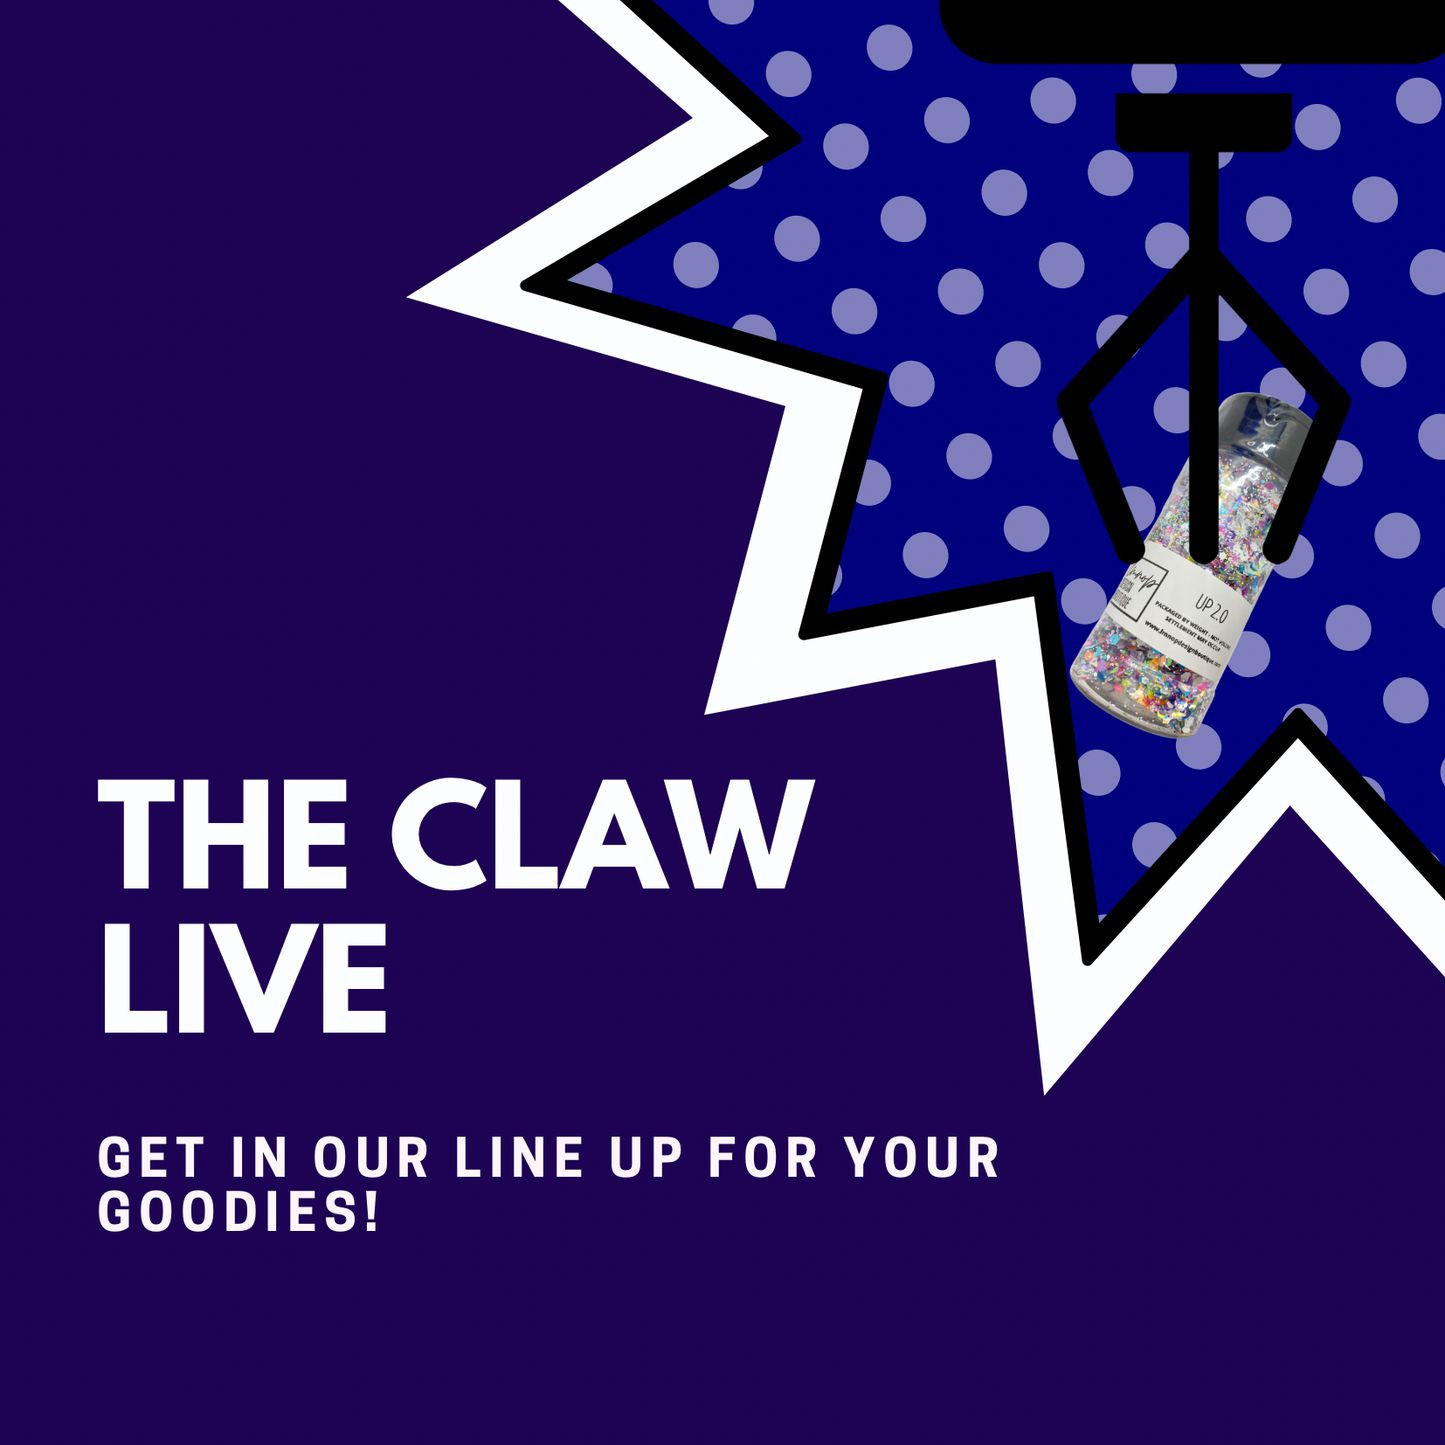 THE CLAW - LIVE!